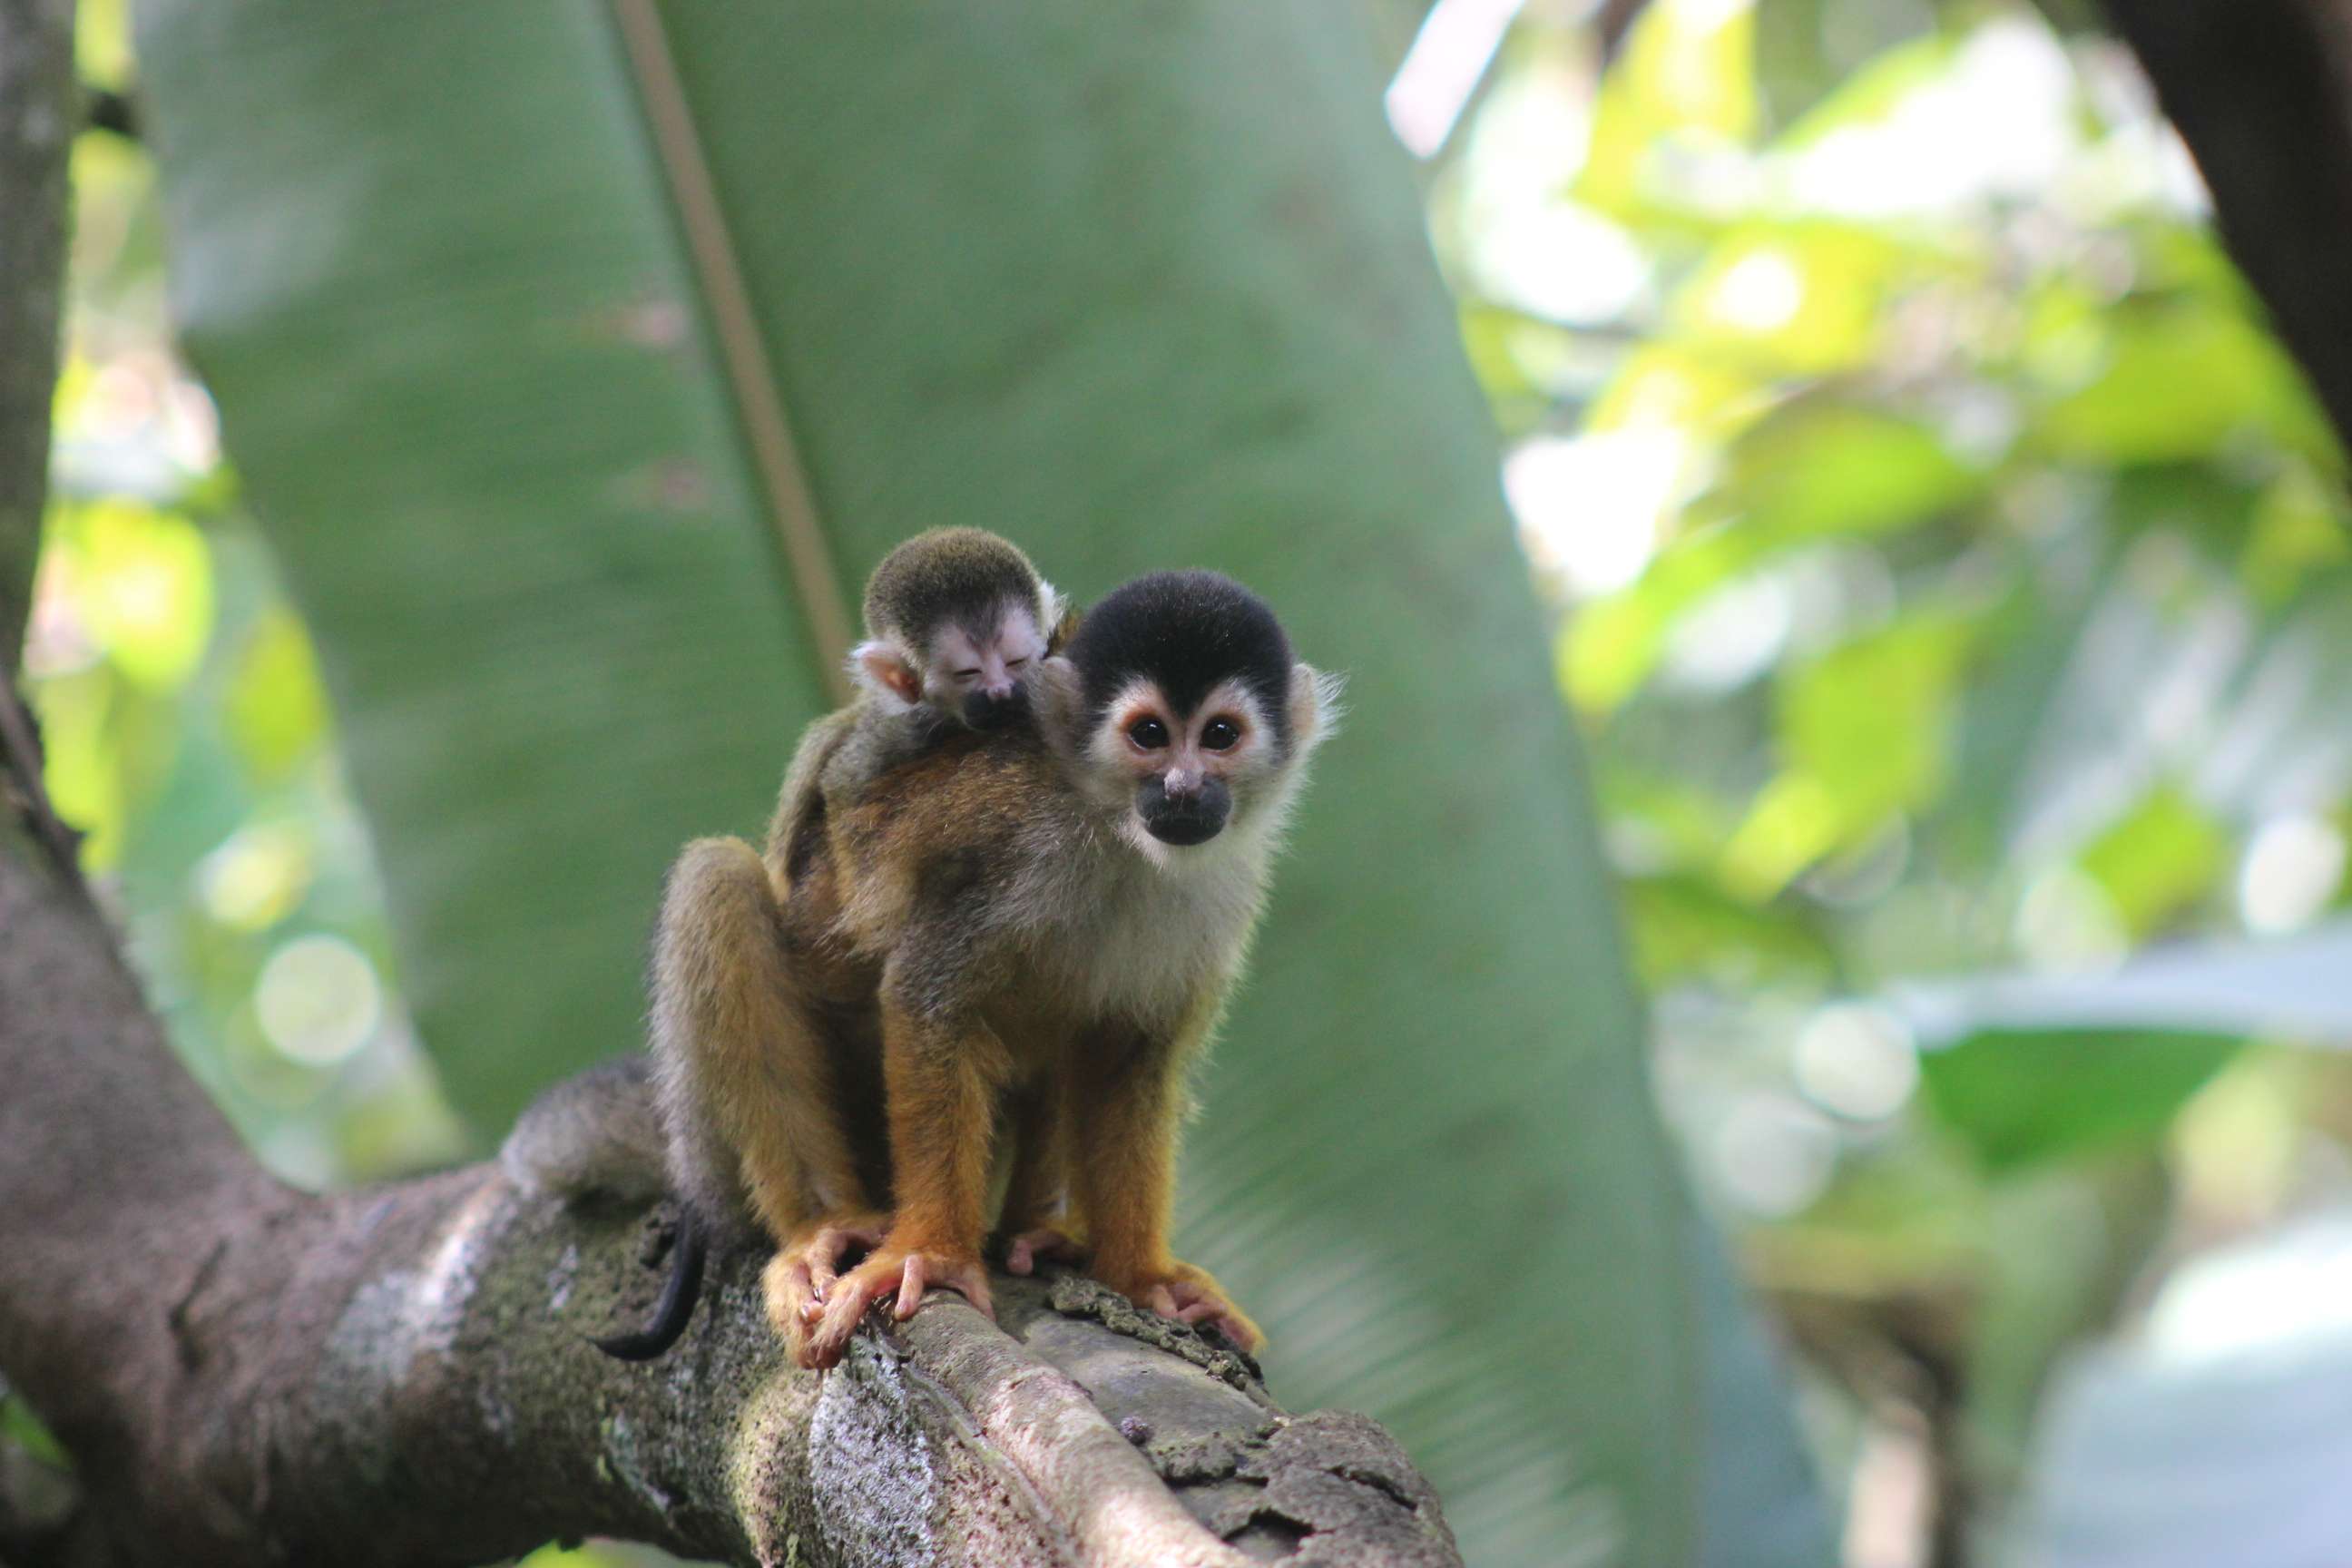 the common squirrel monkey is not threatened however the Central American squirrel monkey and the black squirrel monkey are listed as Vulnerable by the IUCN. © WWF-US/Abby Wadley